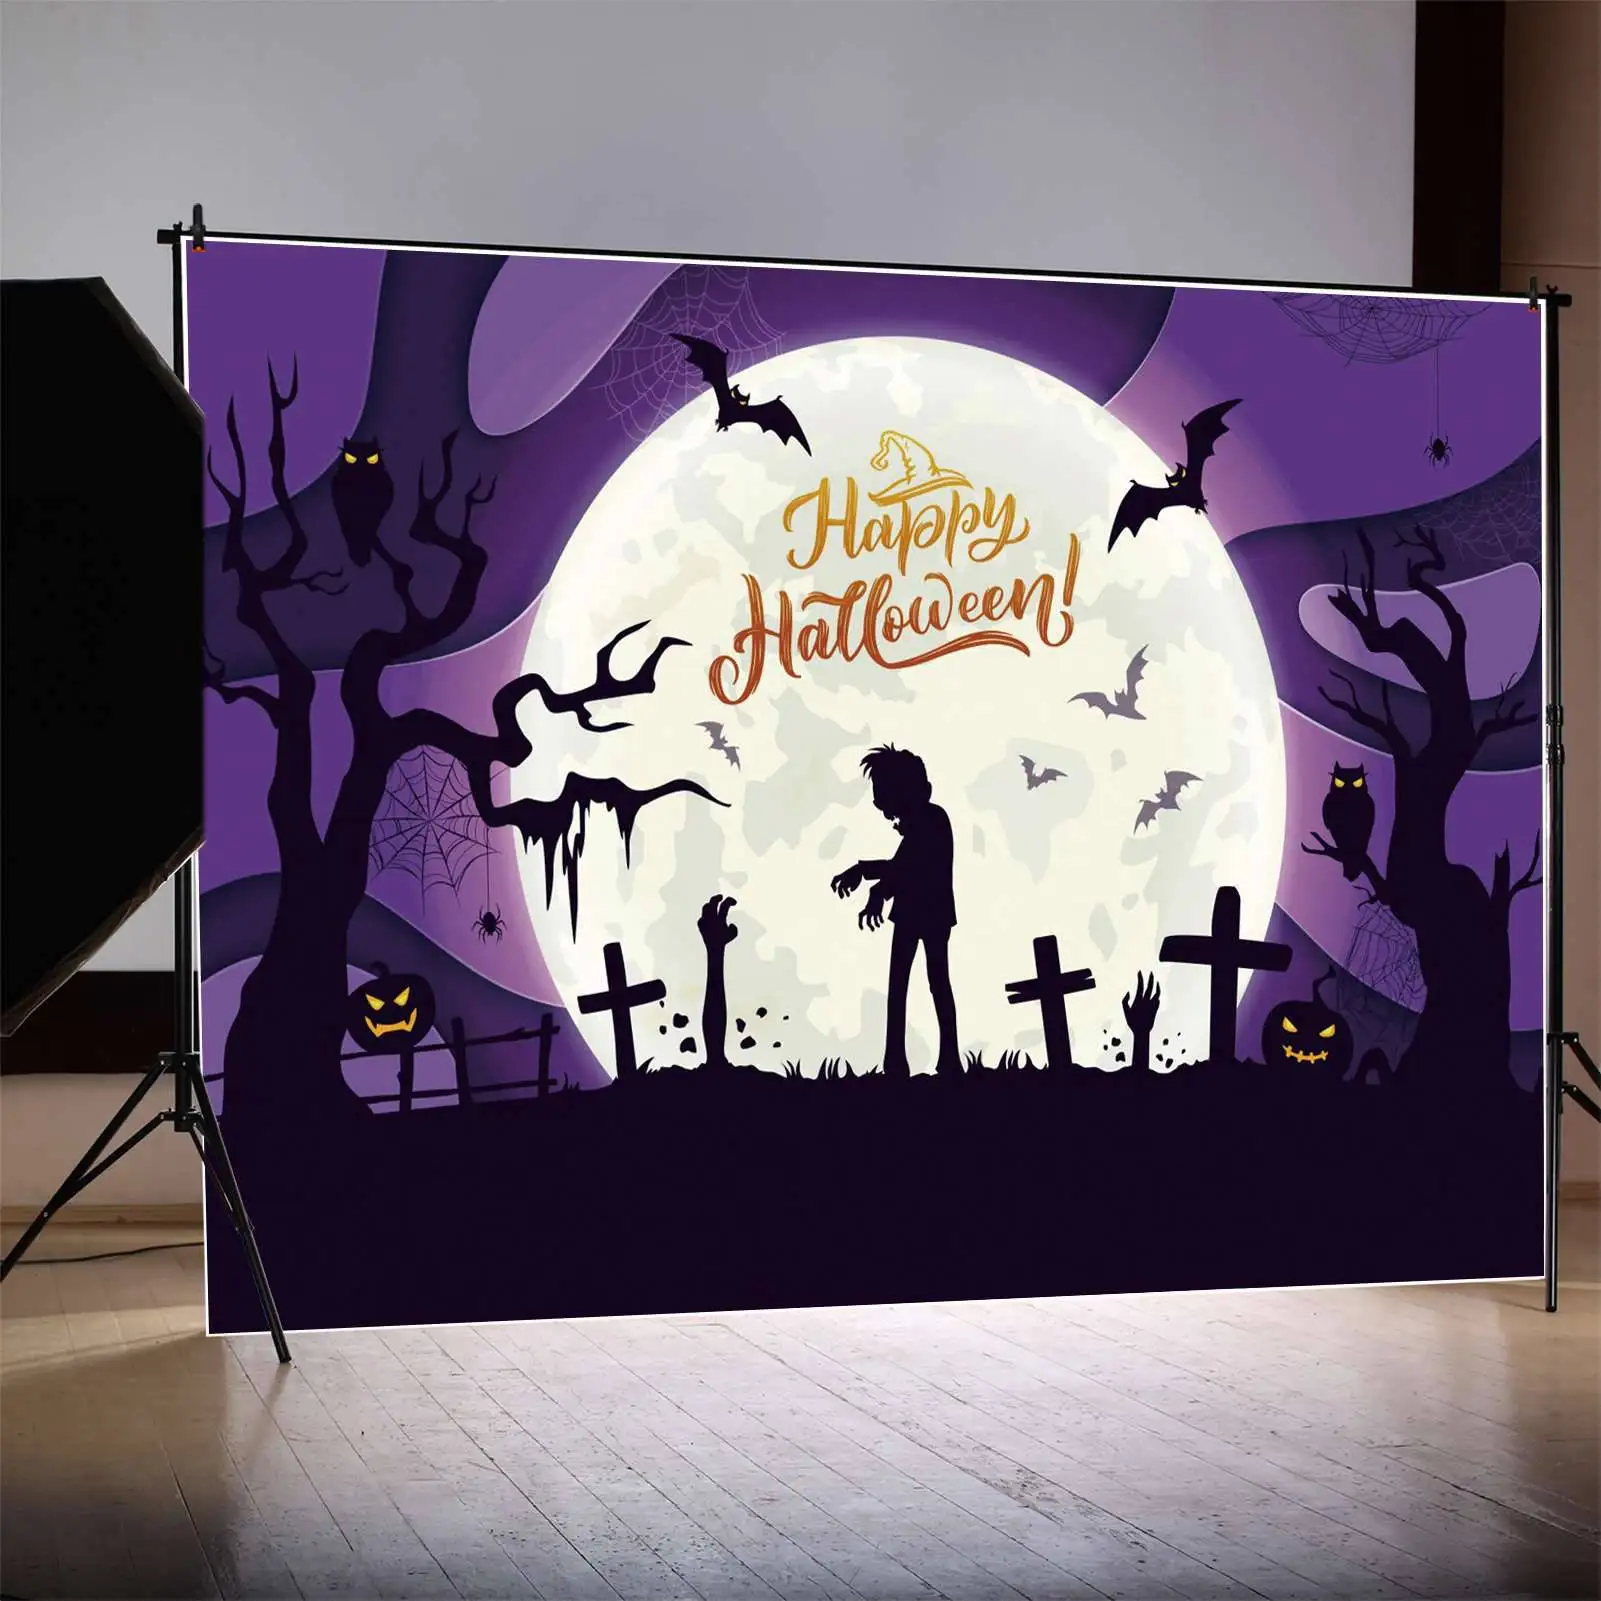 

MOON.QG Backdrop Happy Halloween Banner Zombie Tombstone Decor Background Jack O Lantern Spider Web Owl Tree Branch Photo Booth